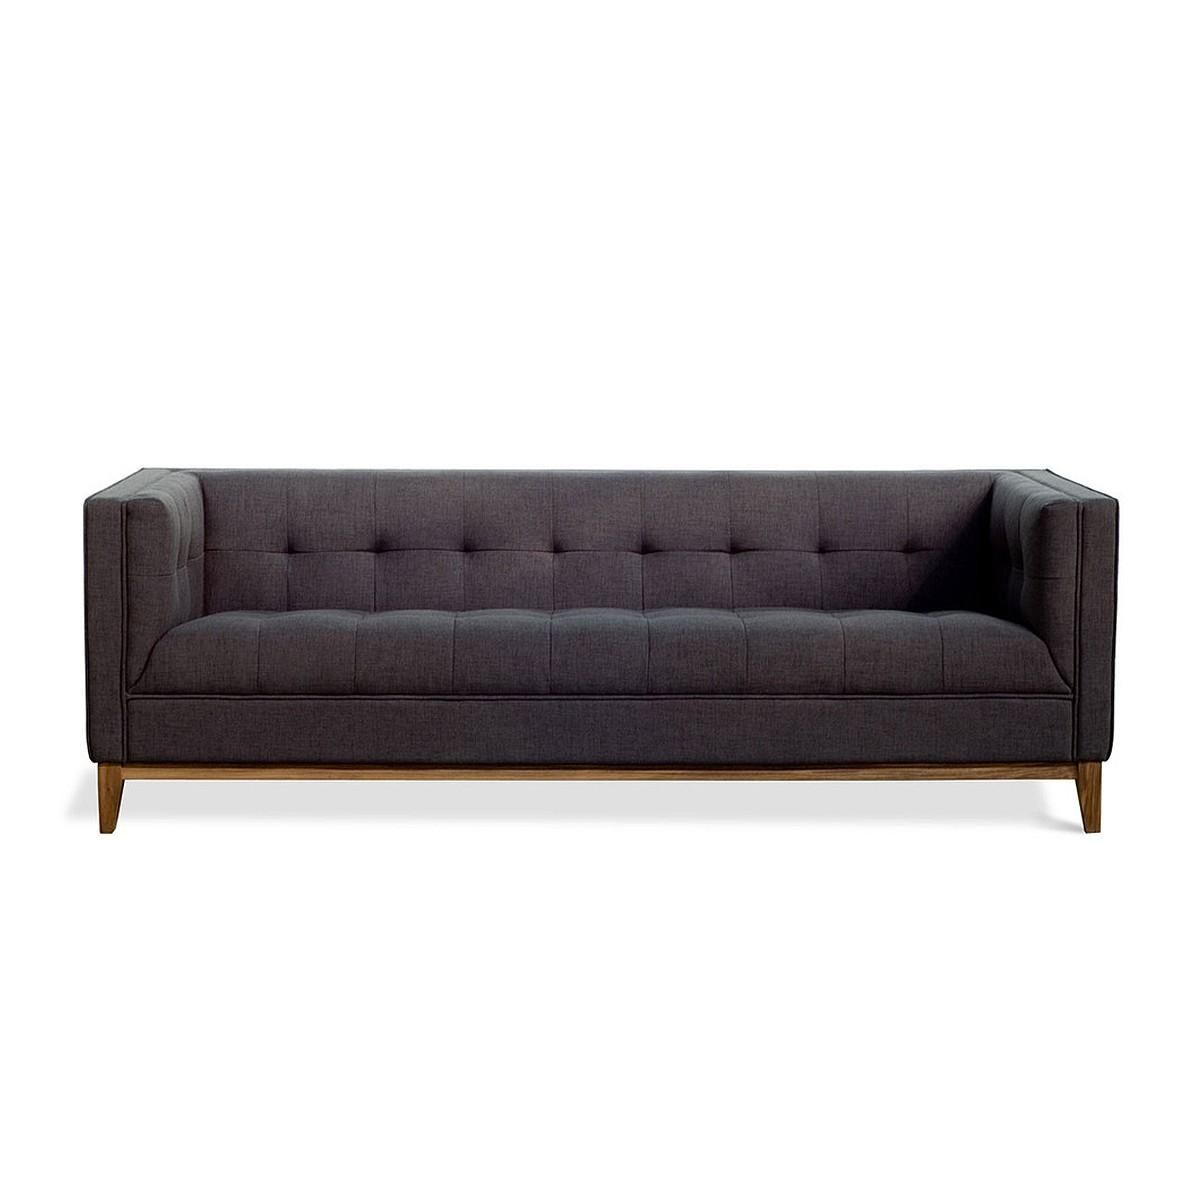 Gus Modern – Atwood 3 Seater Sofa – Modern Sofas For Your Living Intended For Modern 3 Seater Sofas (View 3 of 20)